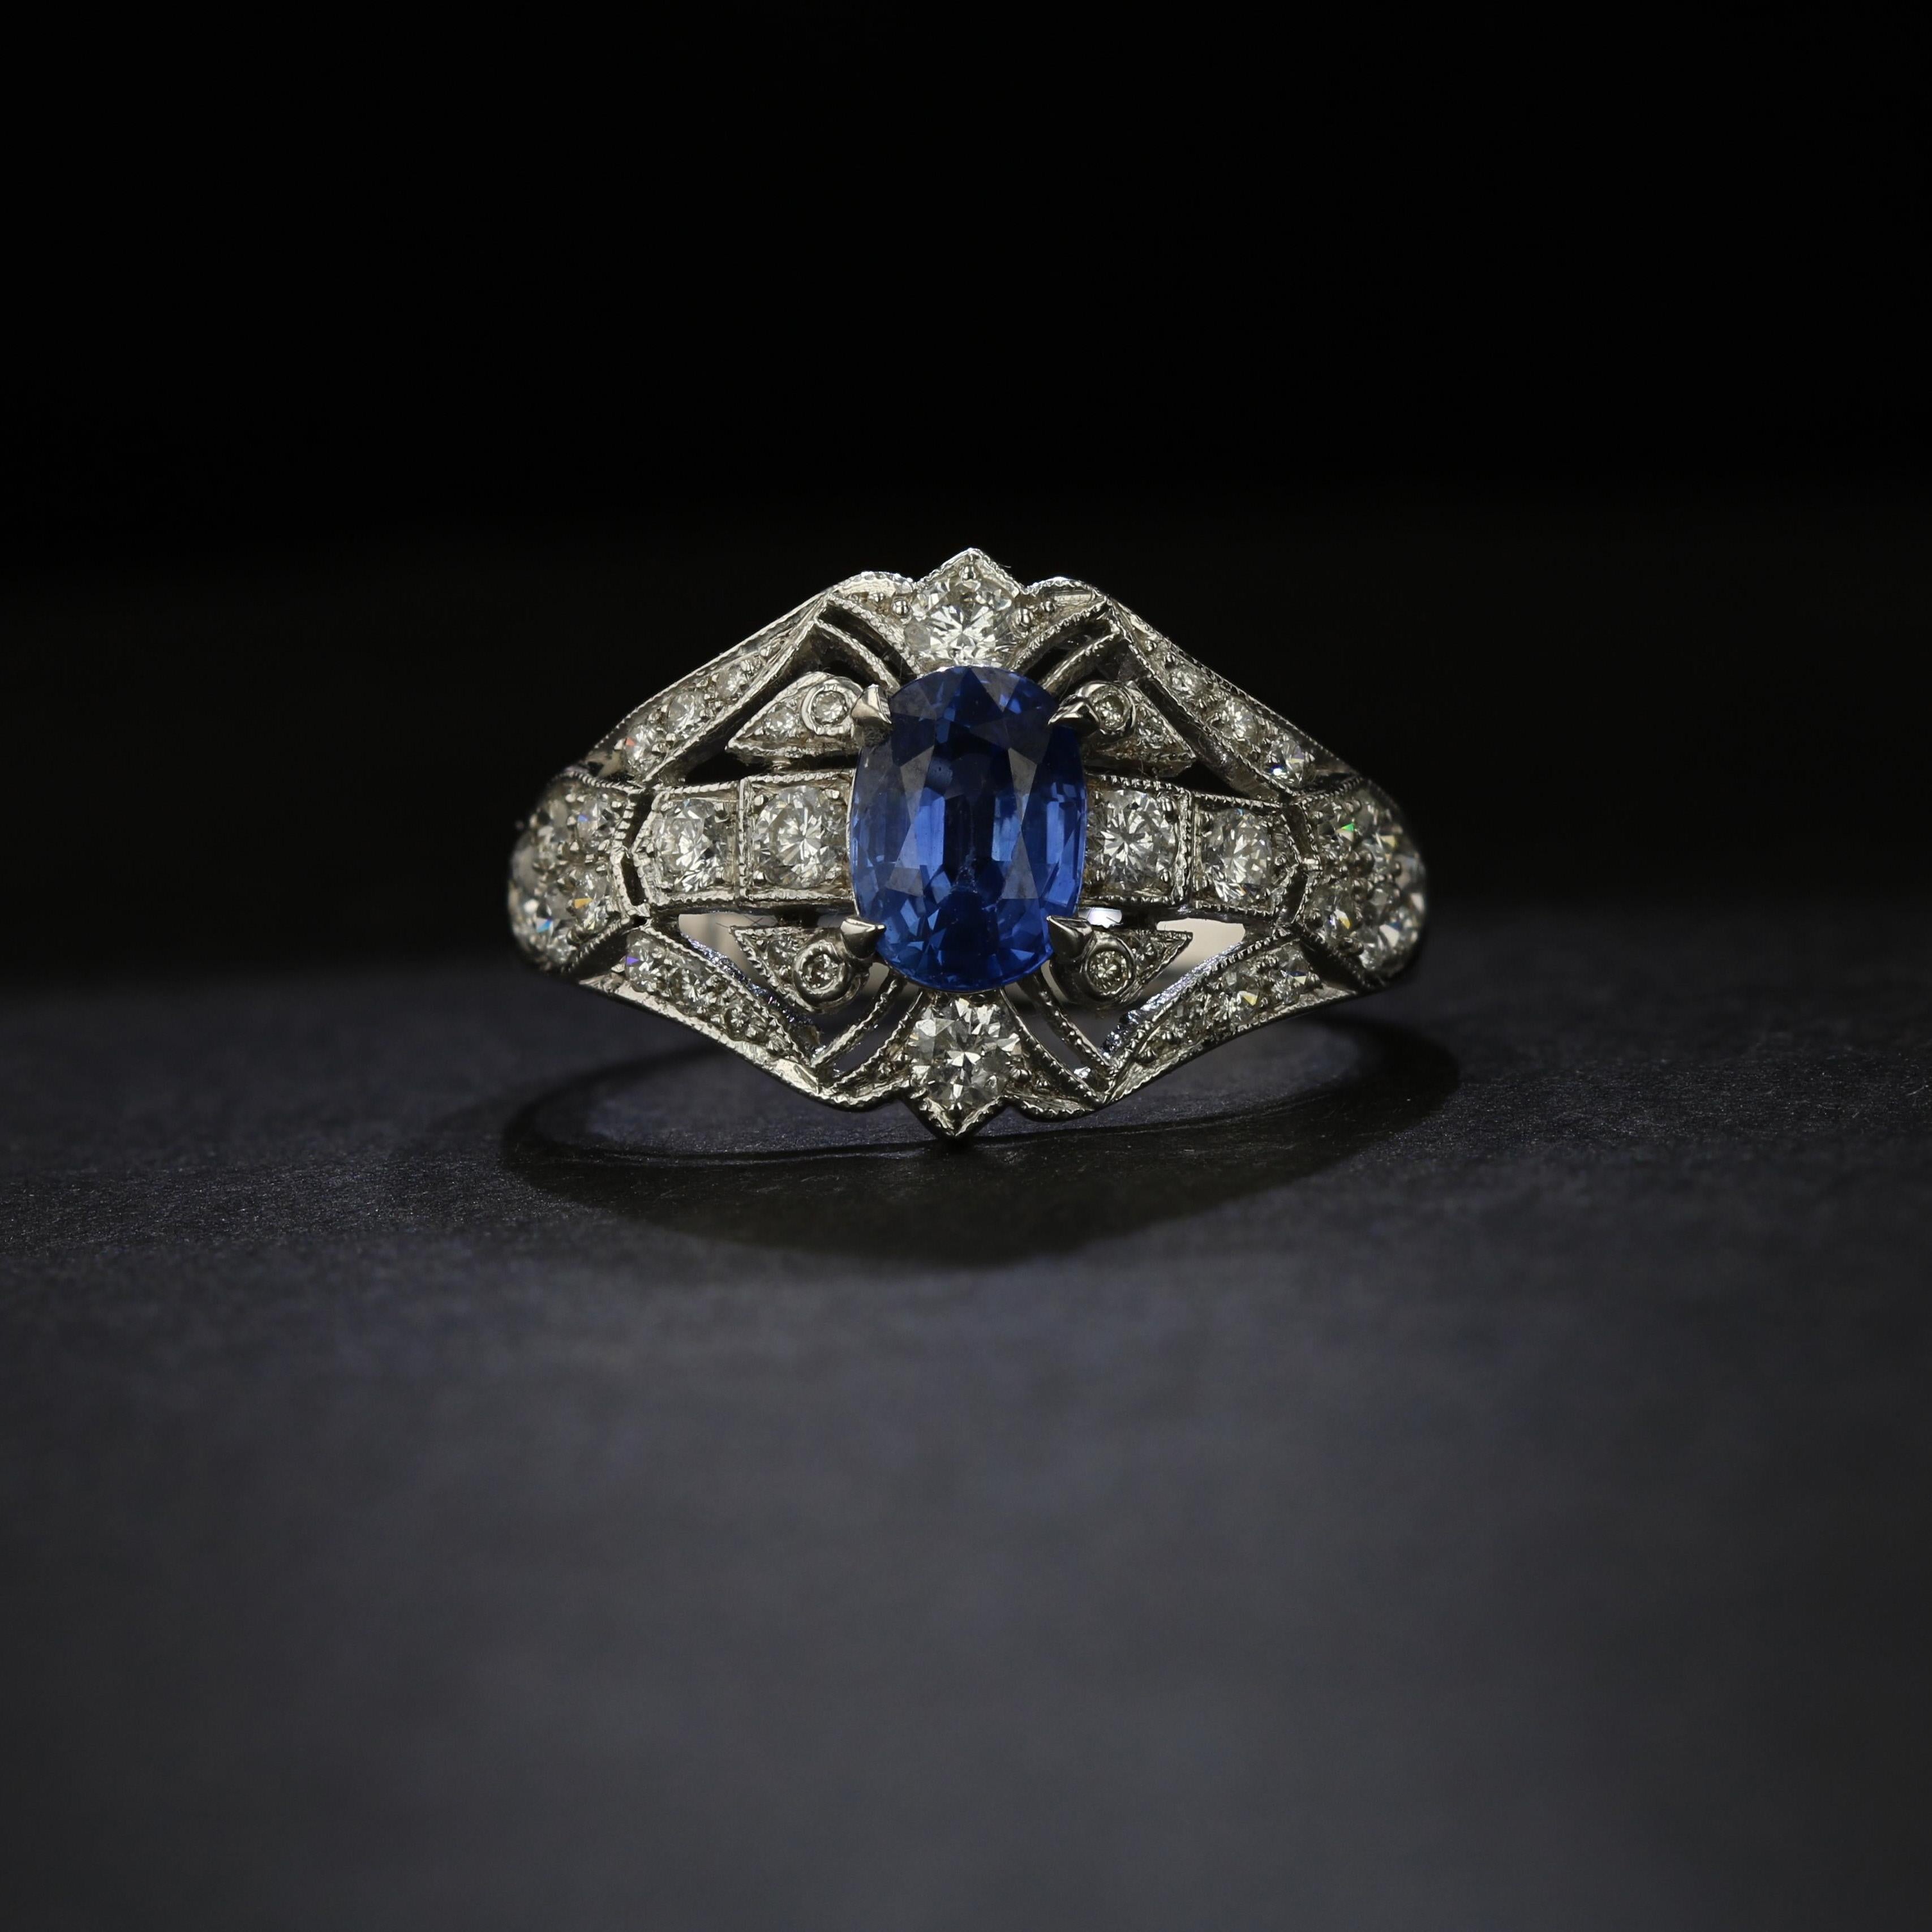 This 14 K white gold Art Deco style ring contains one 1.35 carat oval blue sapphire set by 4 prongs in the center.  The ring features millgrain and filigree details, and is set with an additional 1.35 carats of round diamonds.  The diamonds have an